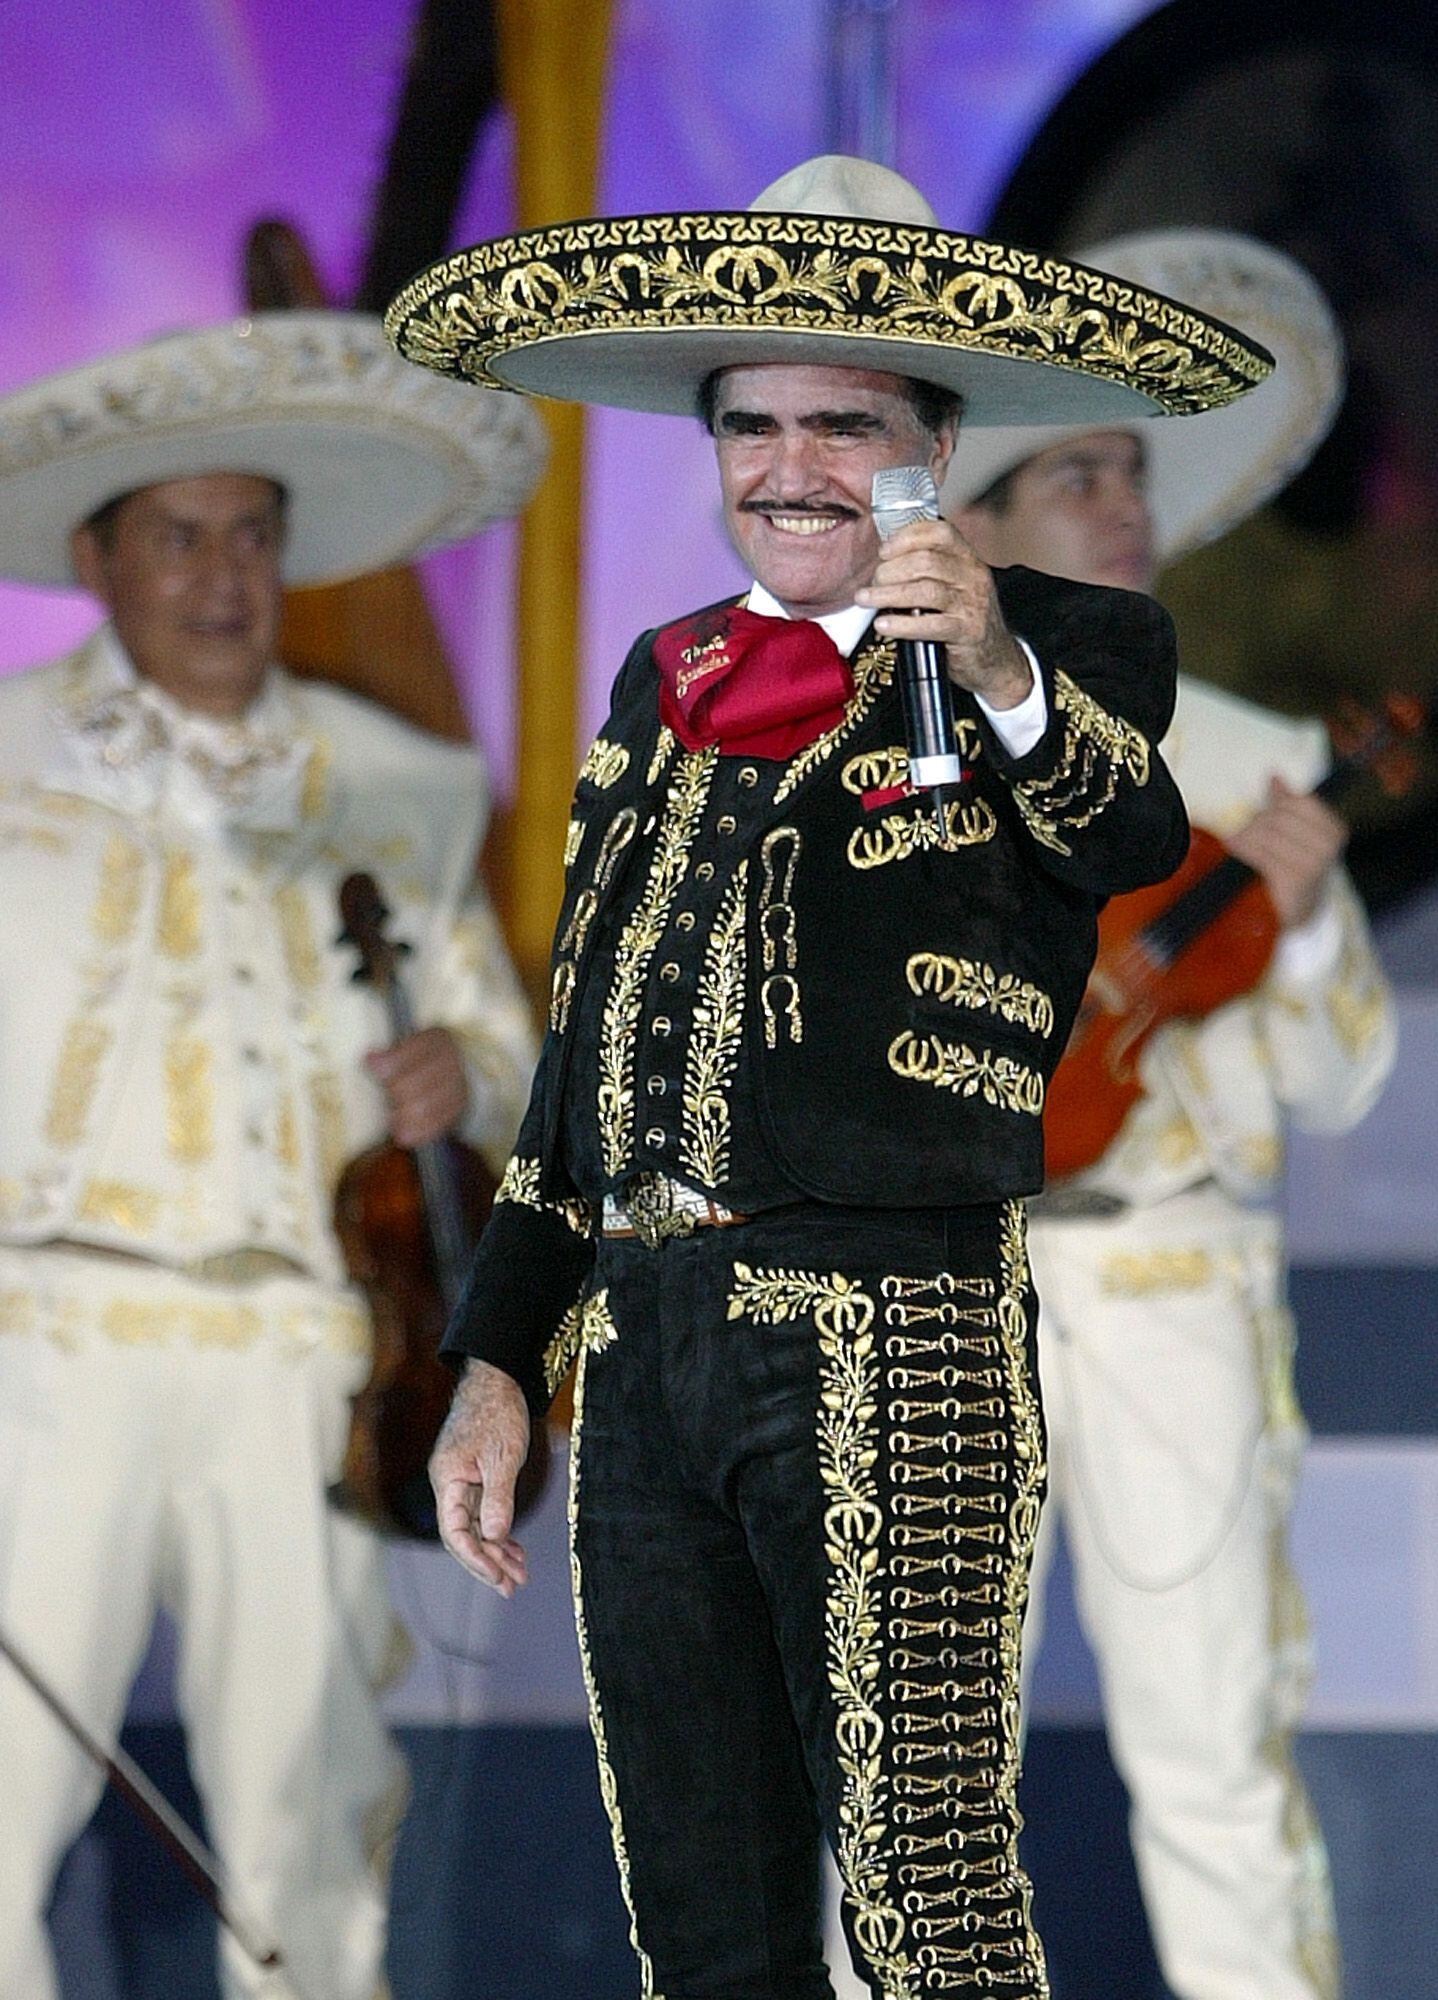 Jaime Jarrín mourned the death of Vicente Fernández and extended